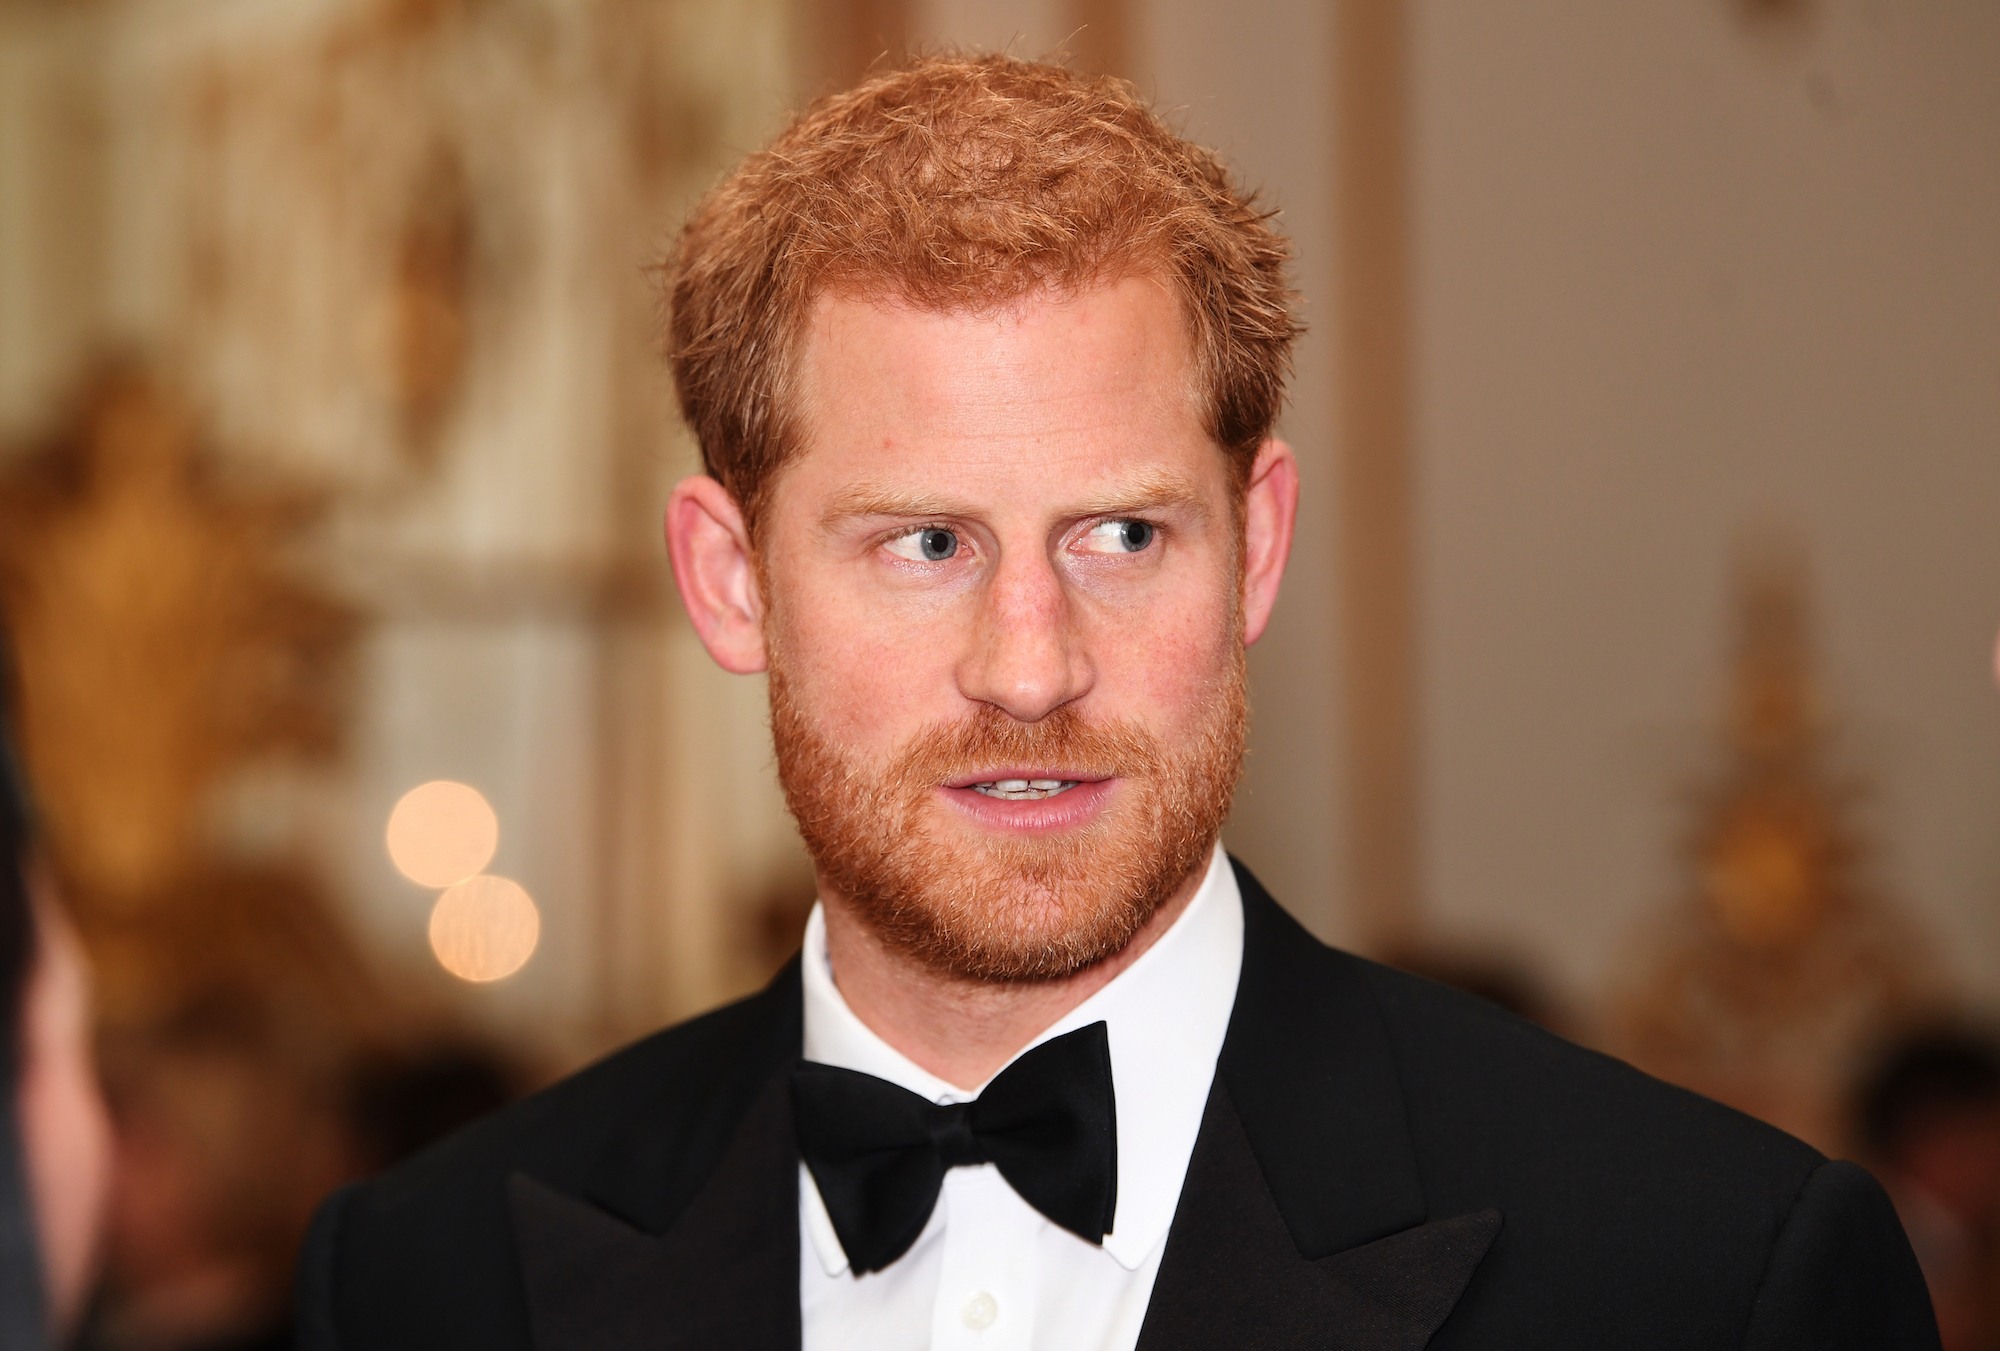 How Does Prince Harry Make His Money? His Royal Net Worth, and More